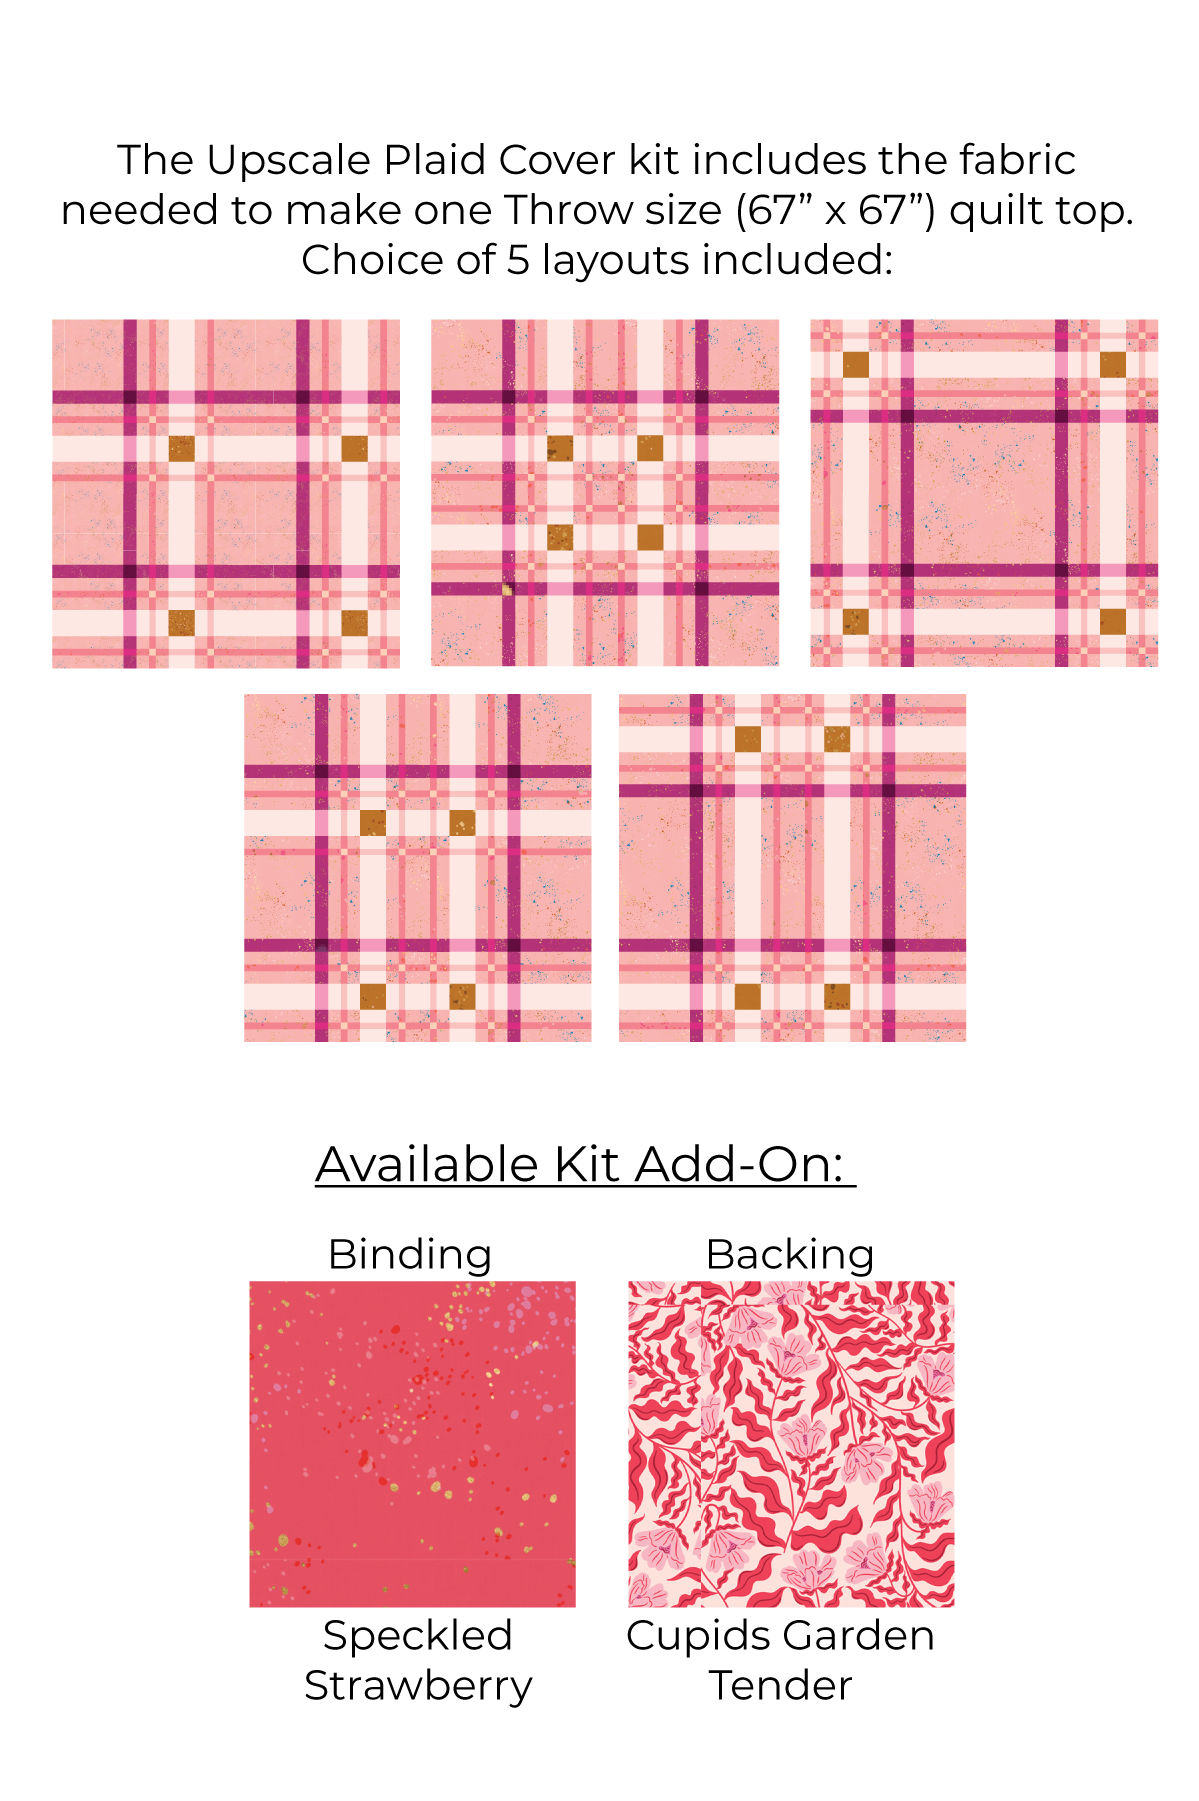 Upscale Plaid - Speckled - Quilt Kit - THROW Size